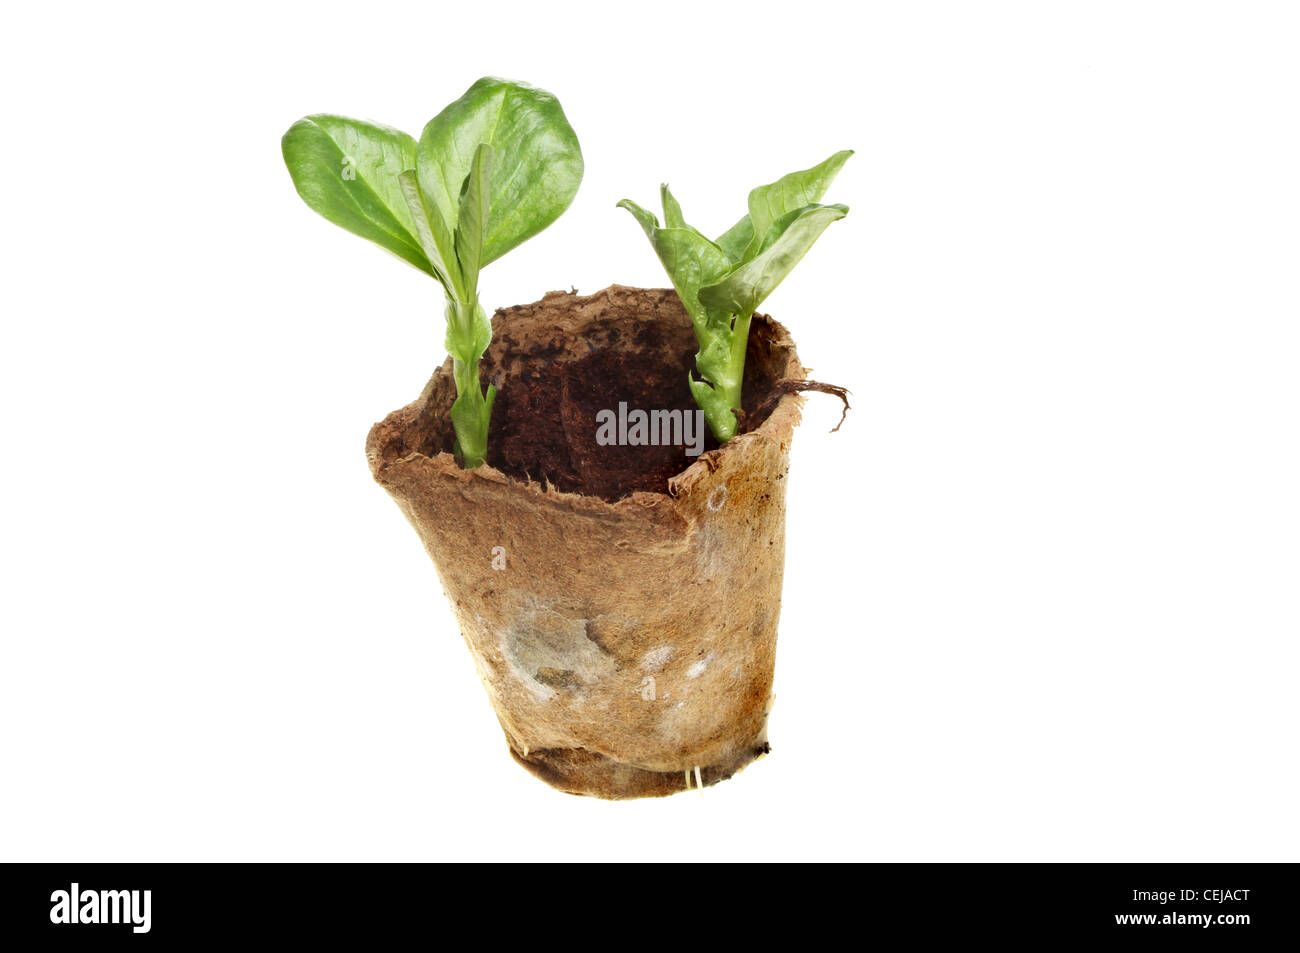 Broad bean seedlings in a fiber pot isolated against white Stock Photo